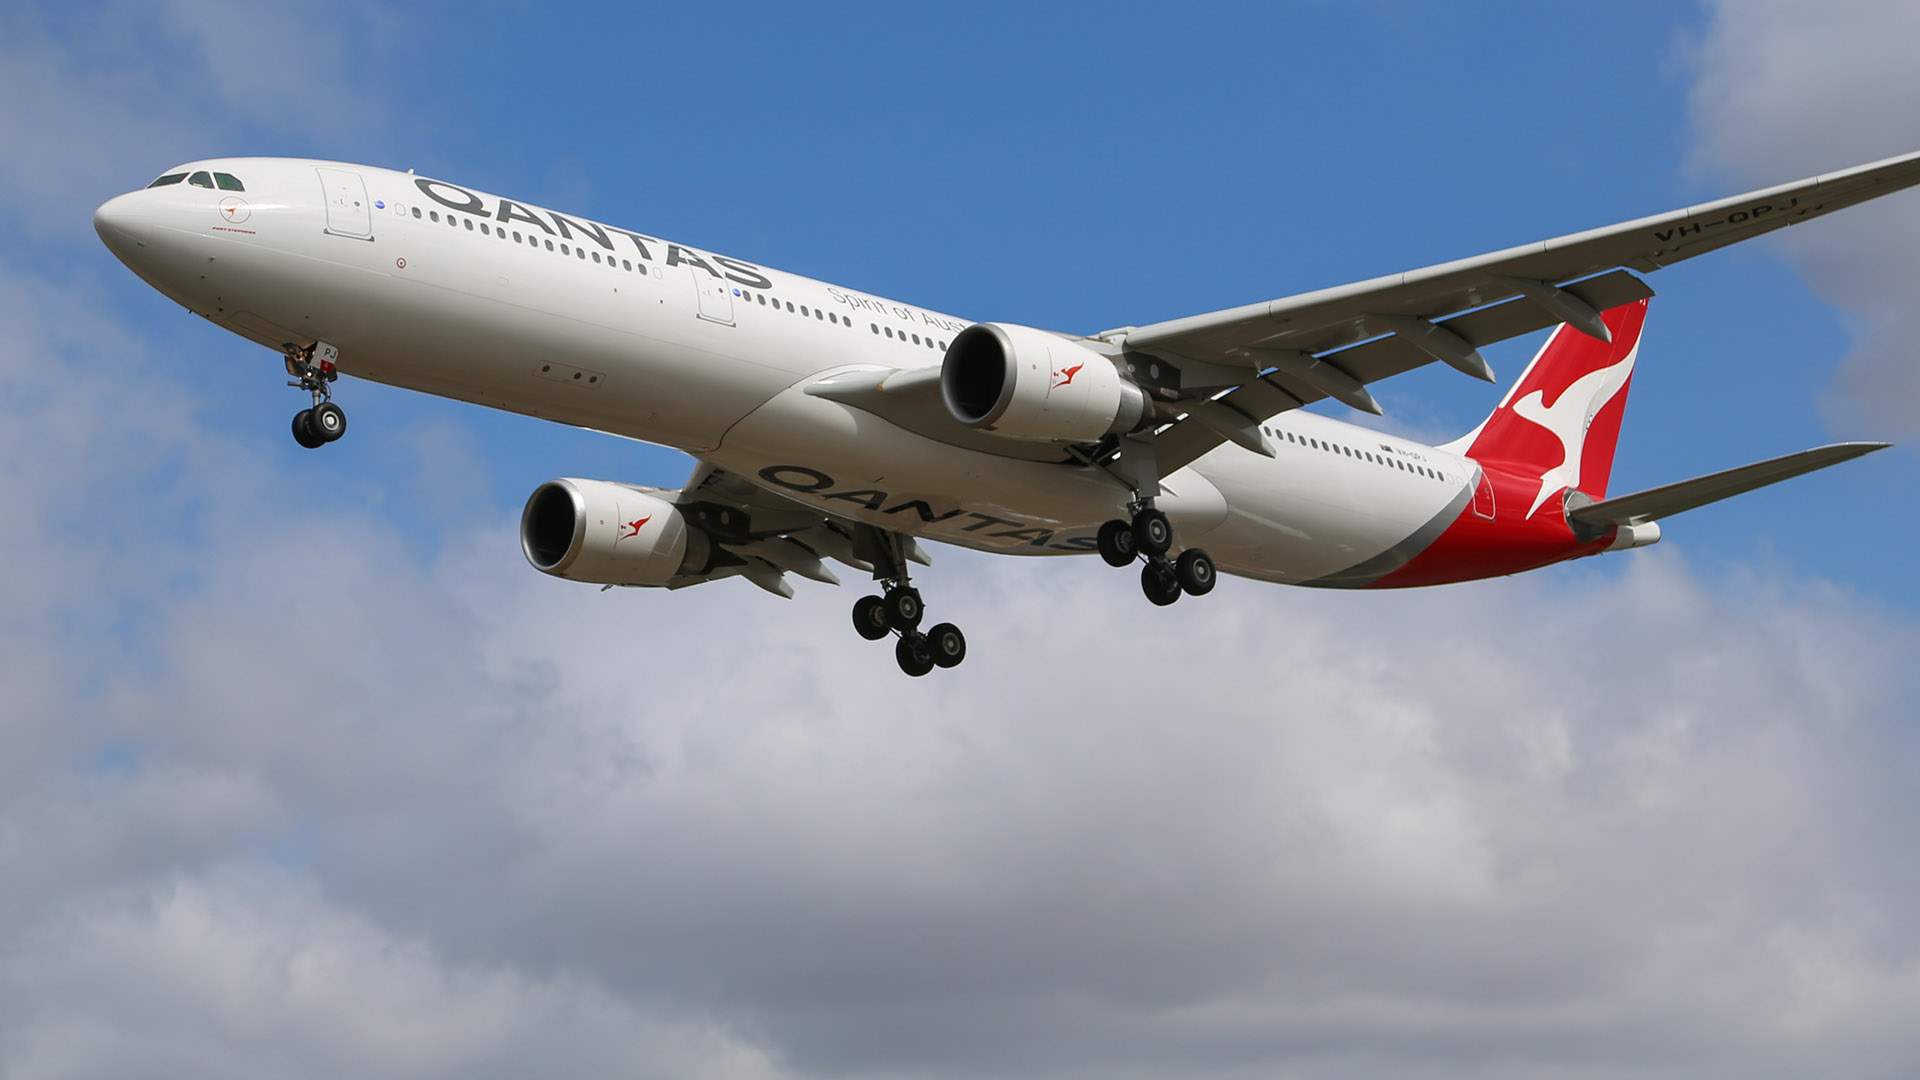 Qantas Might Start Flying Direct From Darwin to London When International Travel Resumes